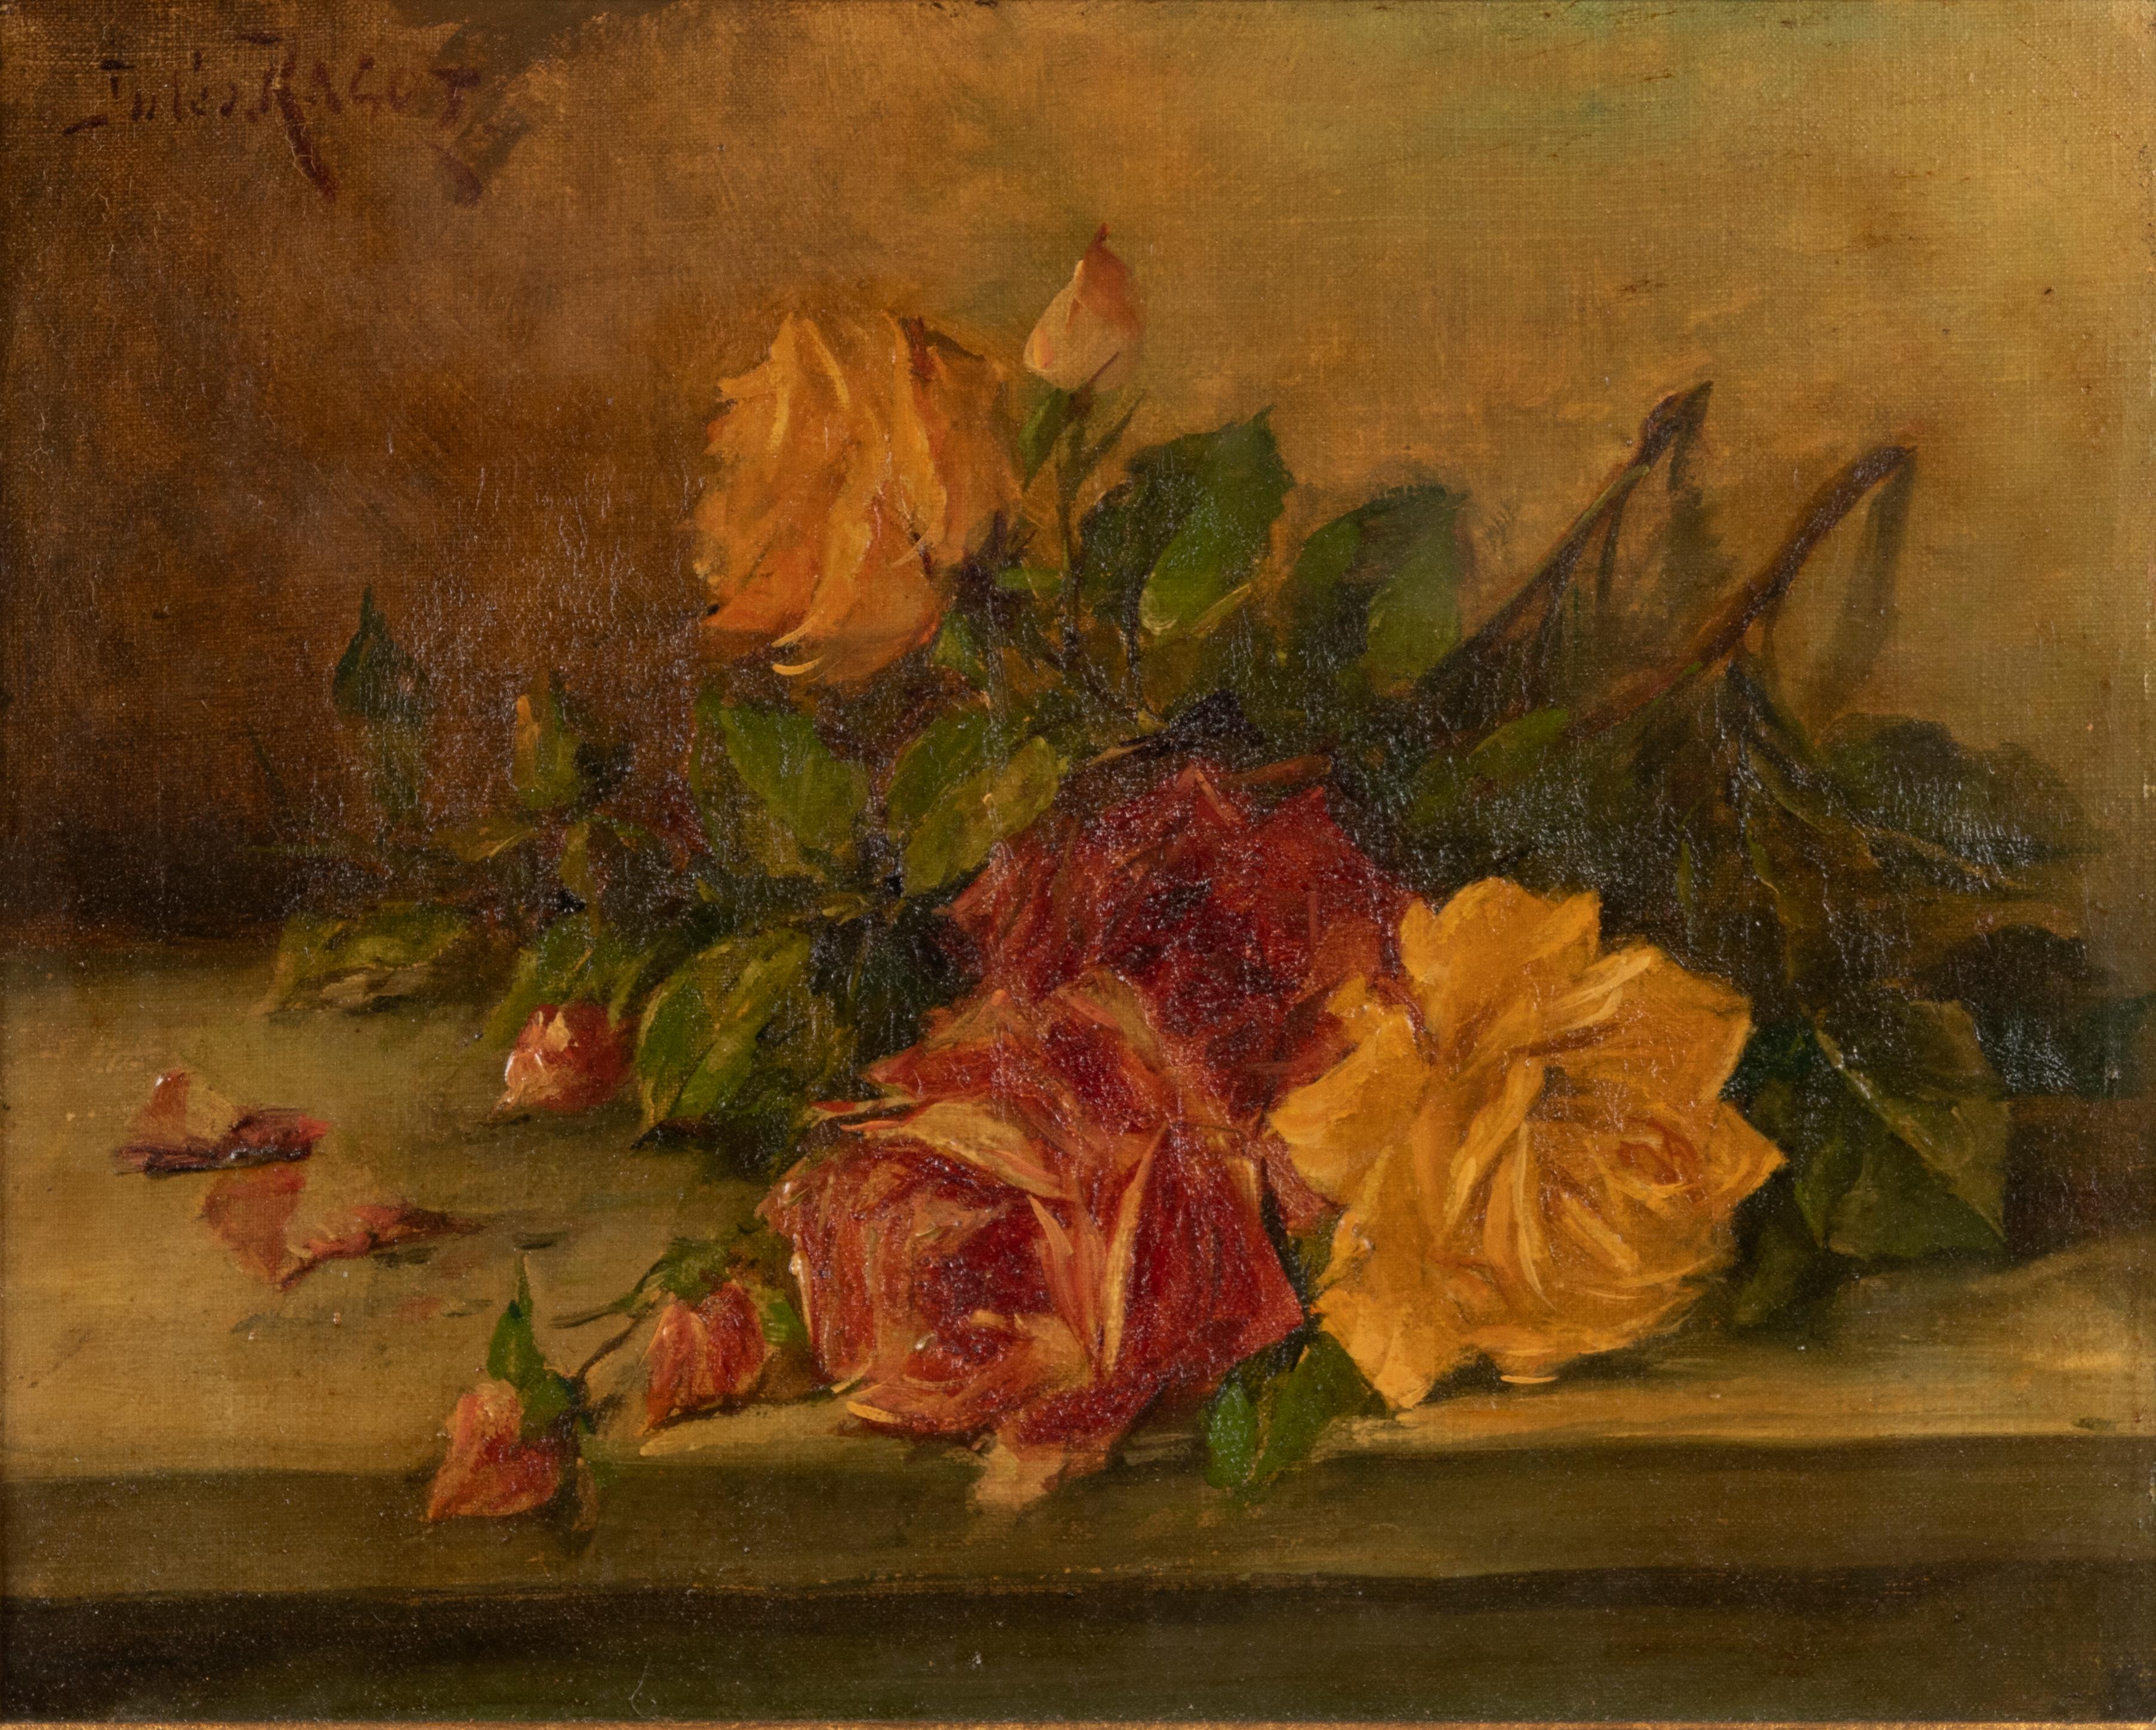 An antique painting of a flower still life with roses. Painted with oil paint on canvas. Gilded wooden frame.

Jules Félix Ragot. Belgium, 1835-1912. Ragot was a Belgian Painter, worked in Brussels. Painted mainly flowers. Exhibited at the